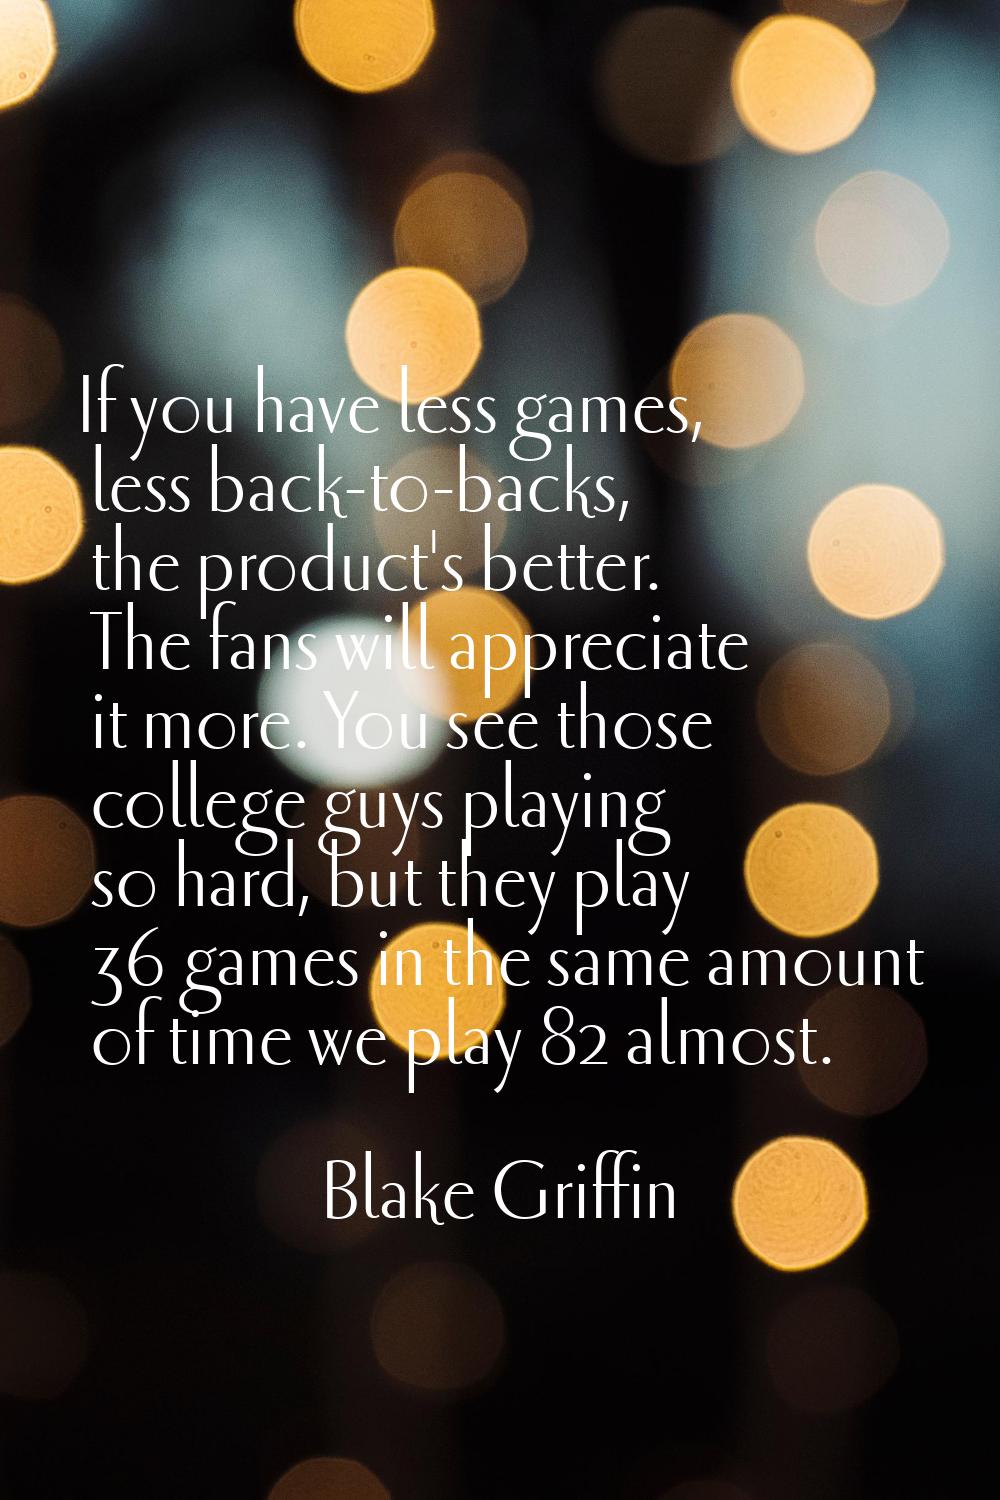 If you have less games, less back-to-backs, the product's better. The fans will appreciate it more.